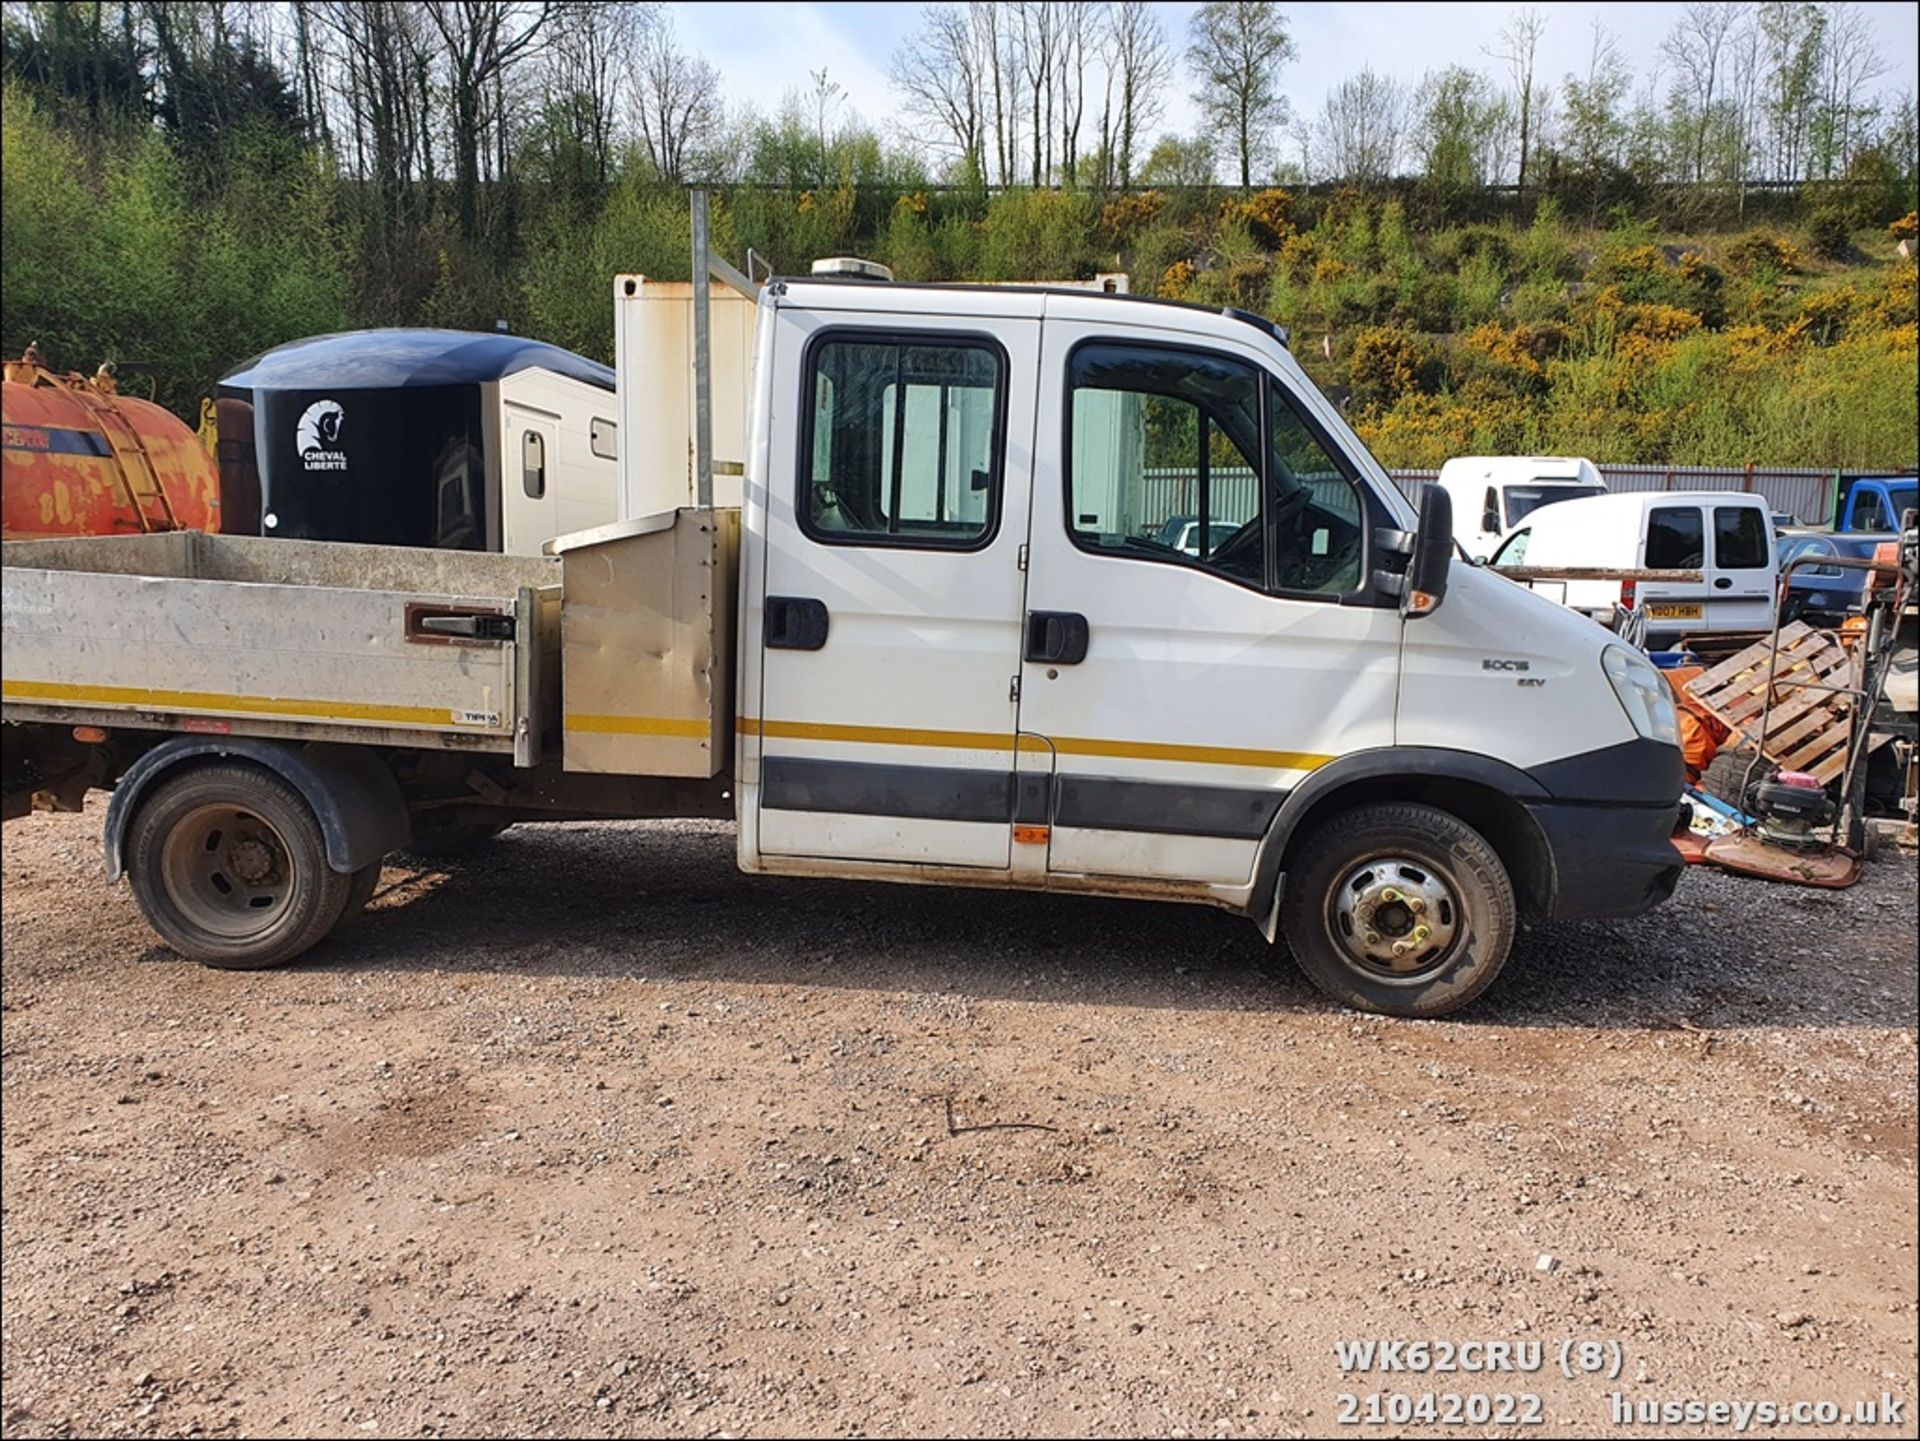 12/62 IVECO DAILY 50C15 - 2998cc 4dr Tipper (White, 111k) - Image 8 of 24